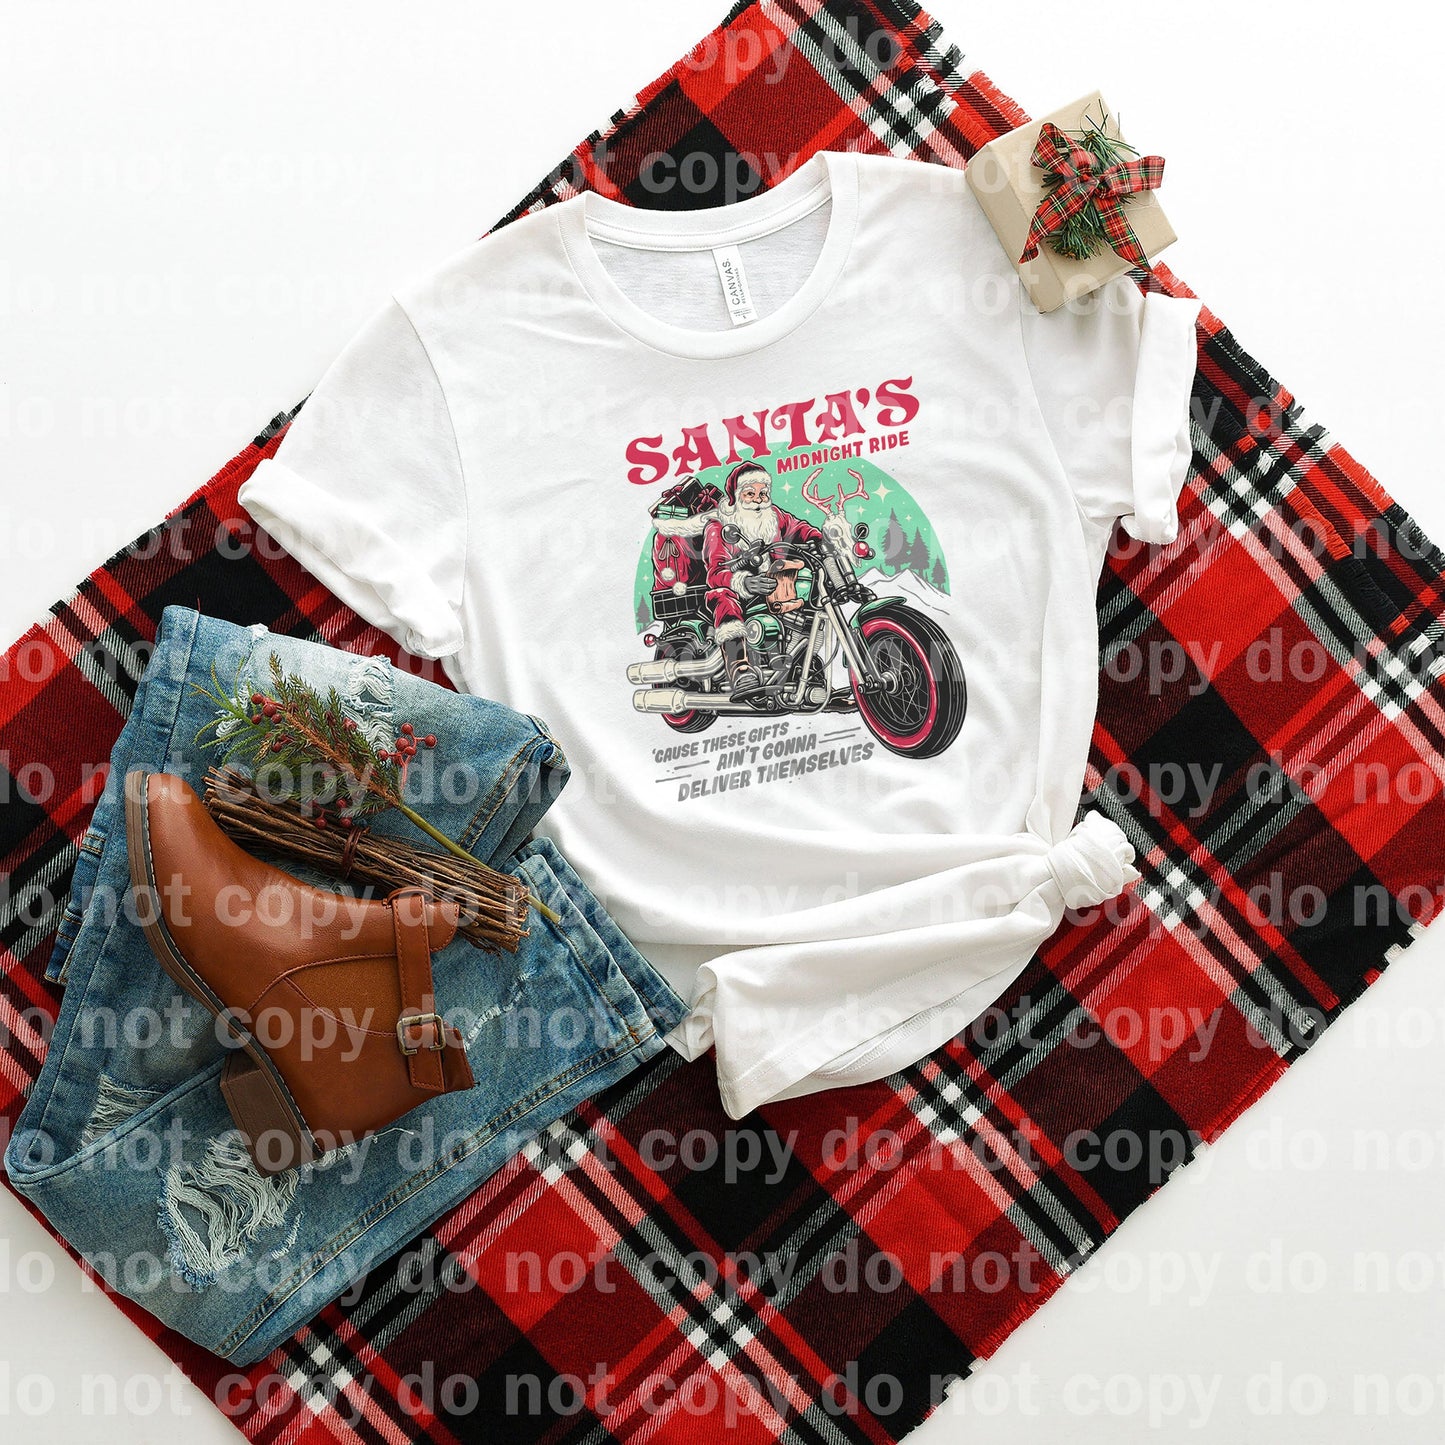 Santa's Midnight Ride Cause These Gifts Ain't Gonna Deliver Themselves Dream Print or Sublimation Print